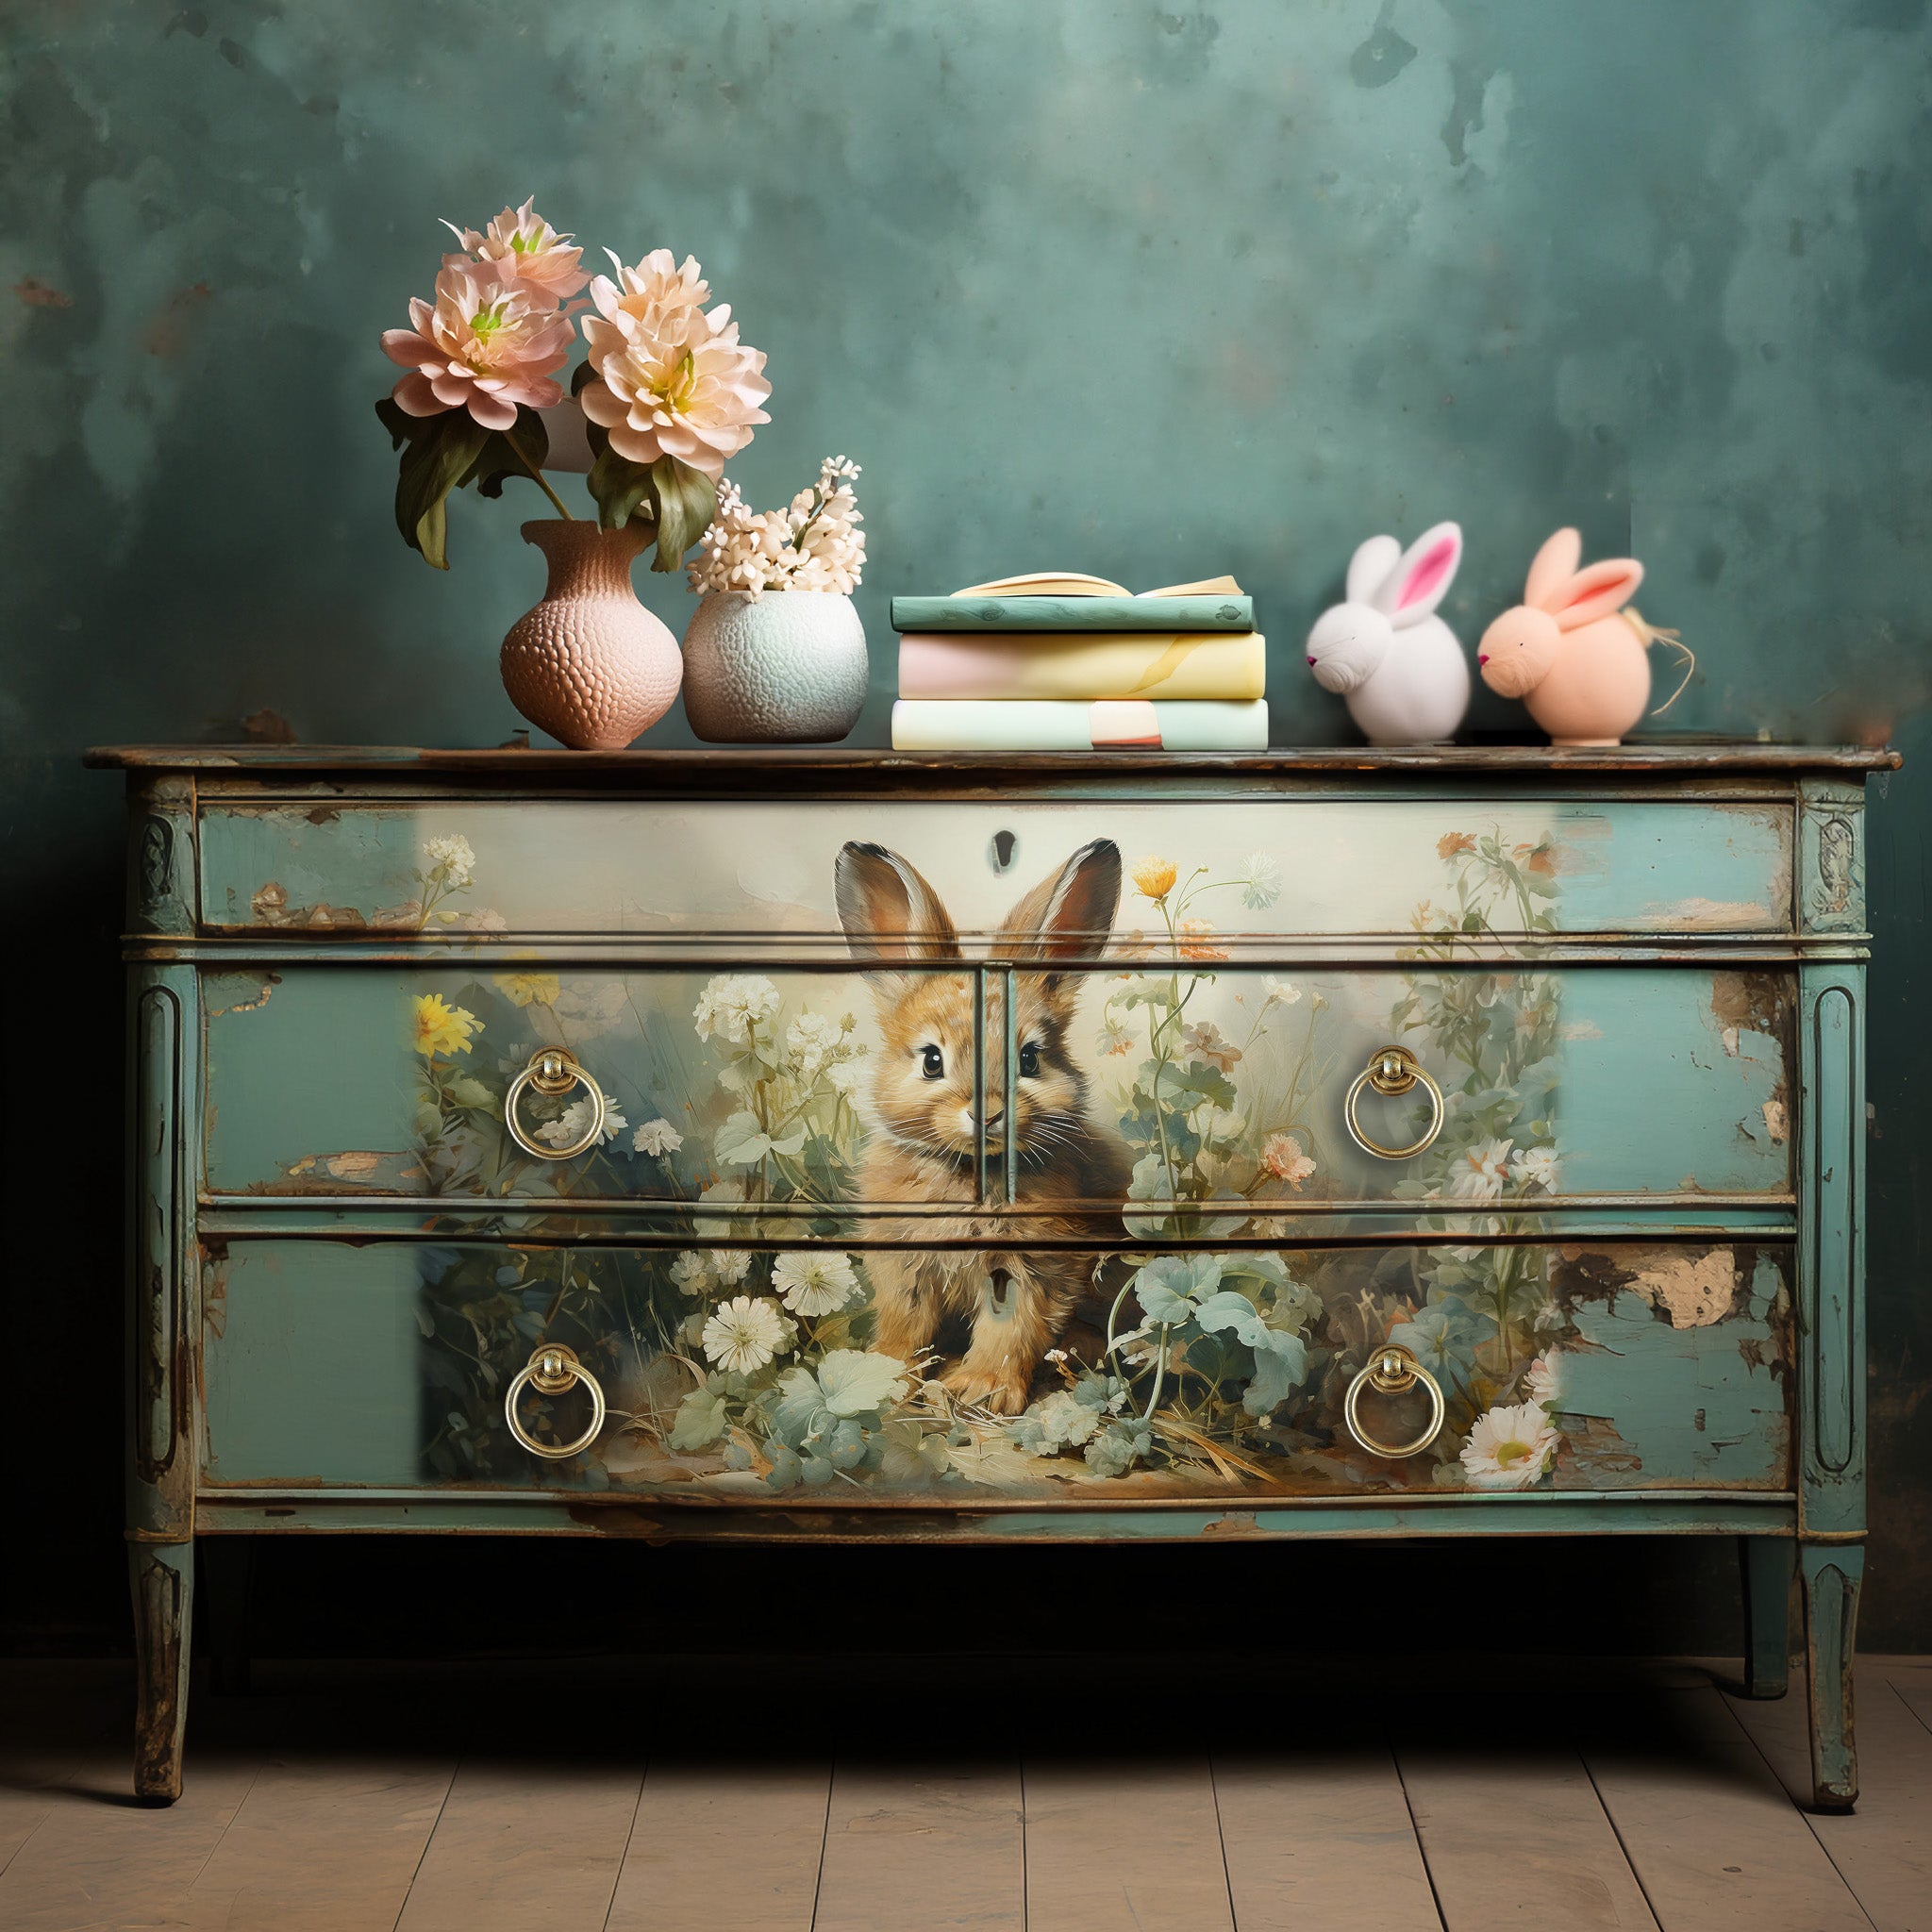 A vintage dresser is painted a weathered pale blue and features 1 design from ReDesign with Prima's Dreamy Bunnies tissue paper in the center of its drawers.